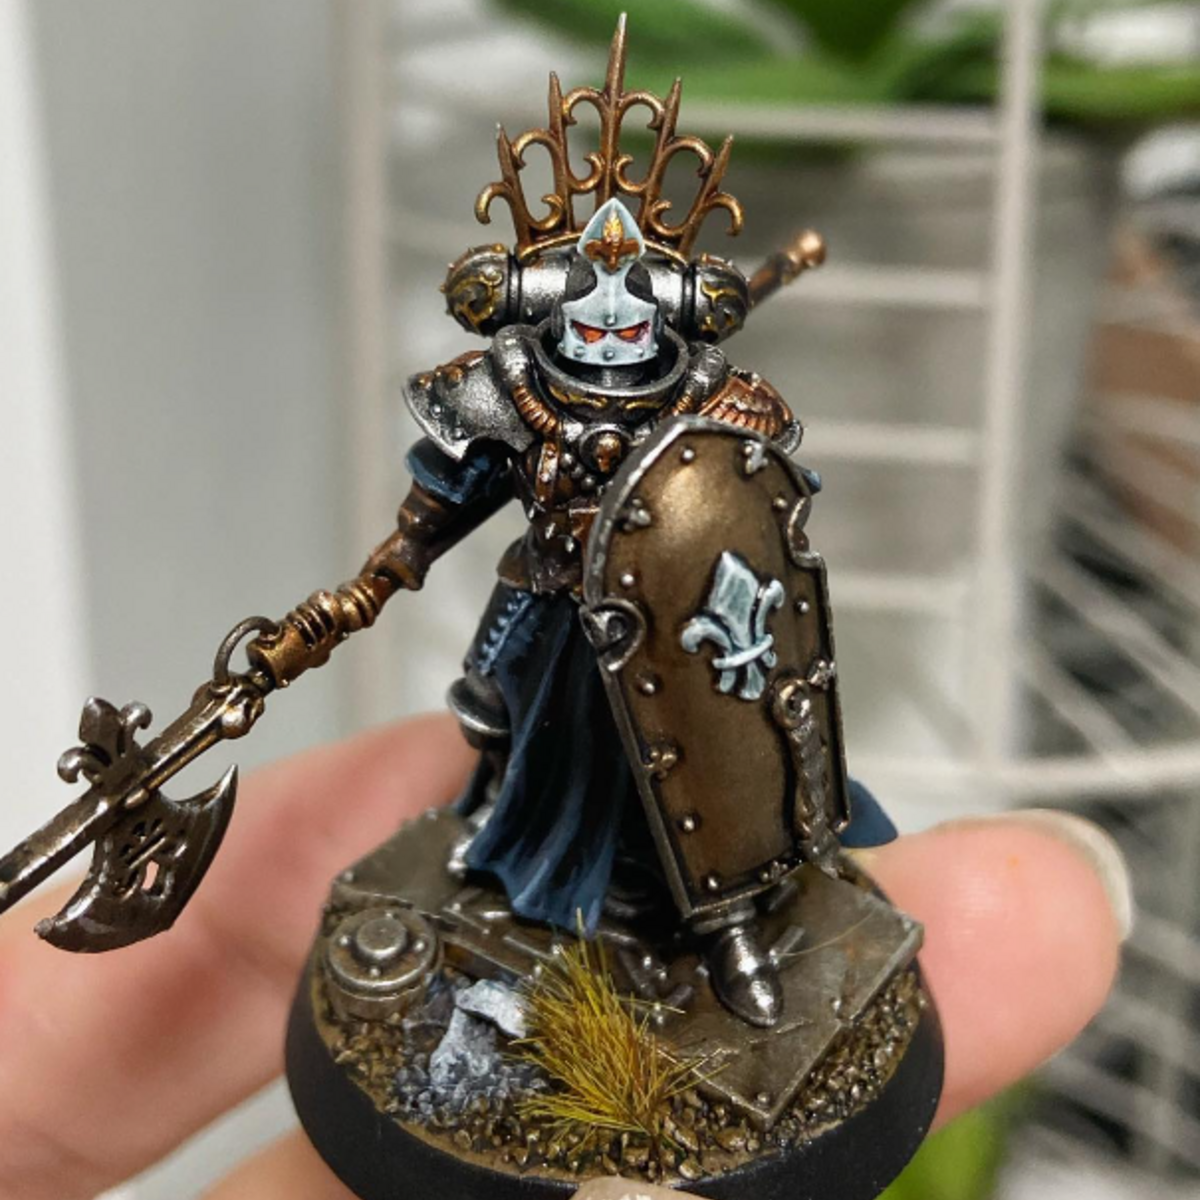 Order of the Thorn - Celestian Sacrosancts